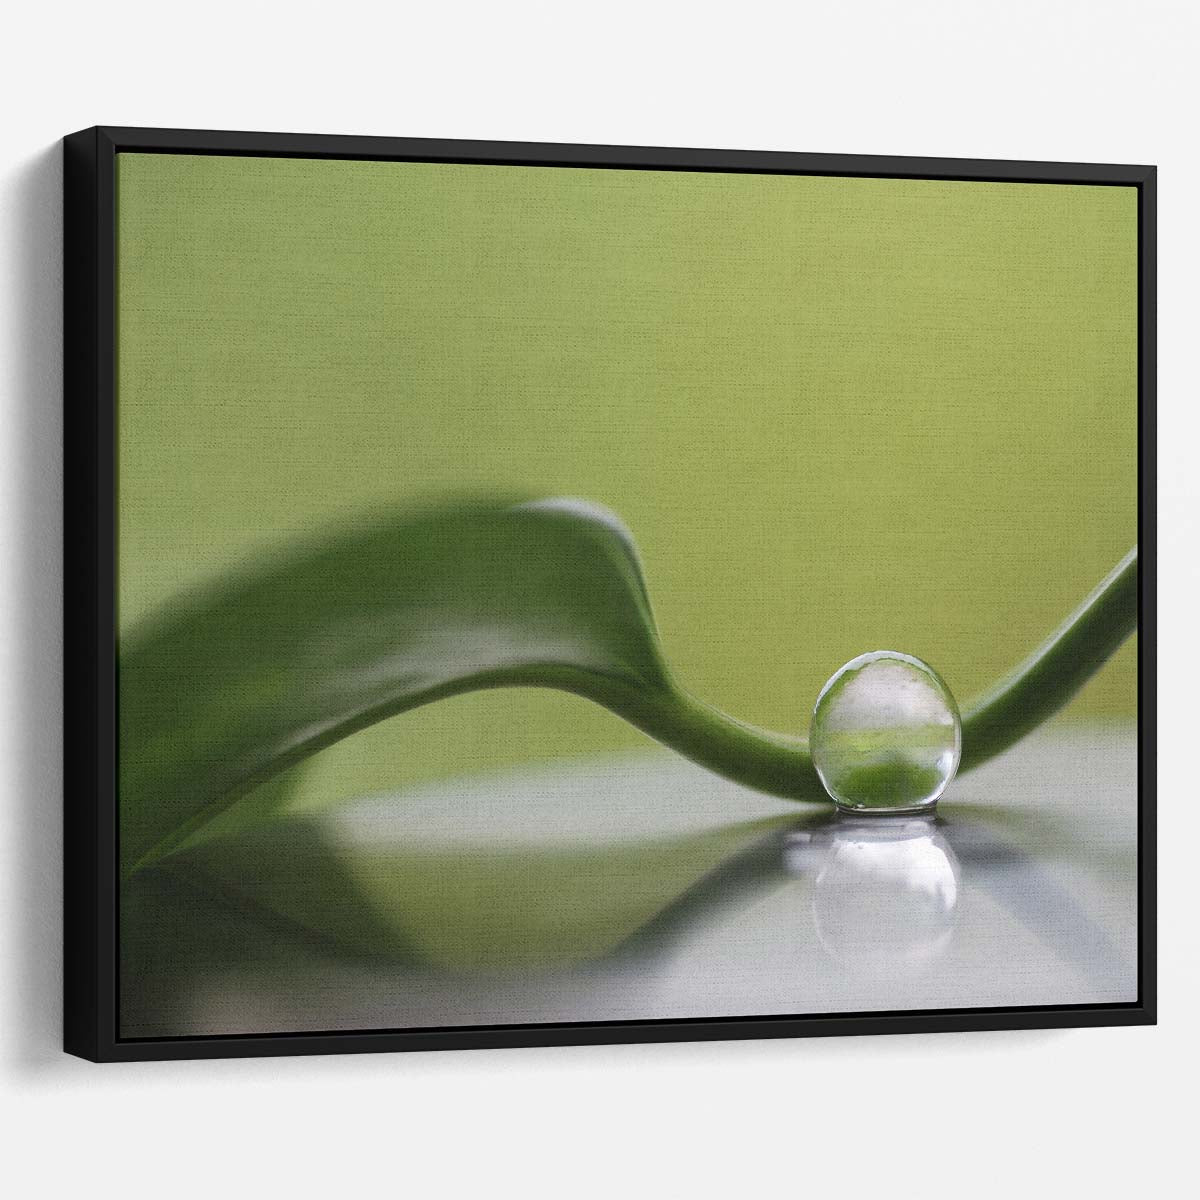 Serene Green Leaf & Dew Drops Botanical Wall Art by Luxuriance Designs. Made in USA.